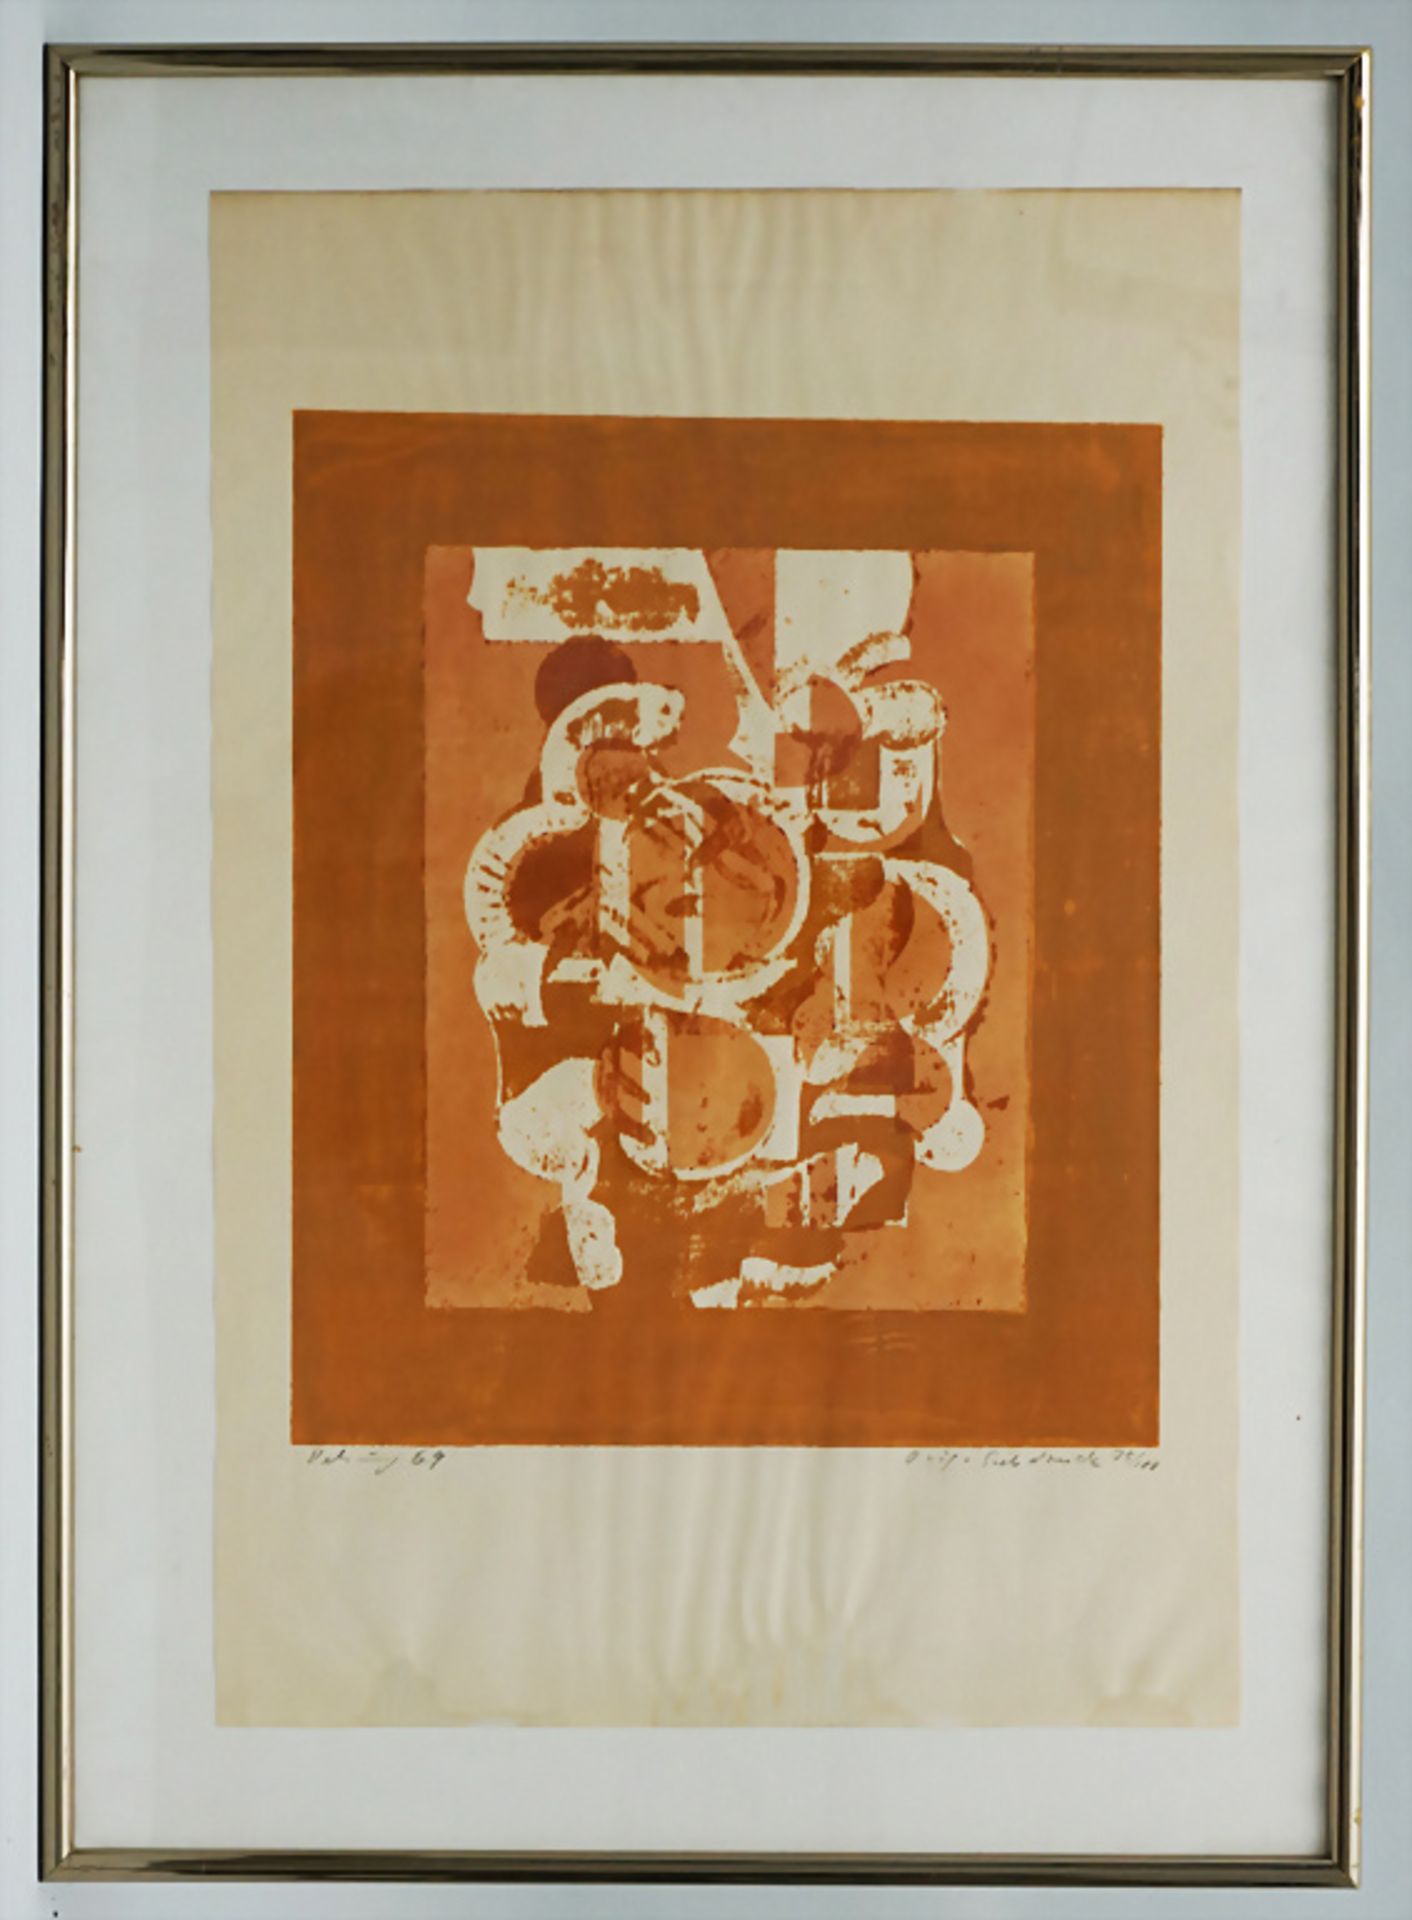 Edith Behring (1916-1996), 'Abstrakte Komposition' / 'An abstract Composition', 1969 - Image 2 of 4